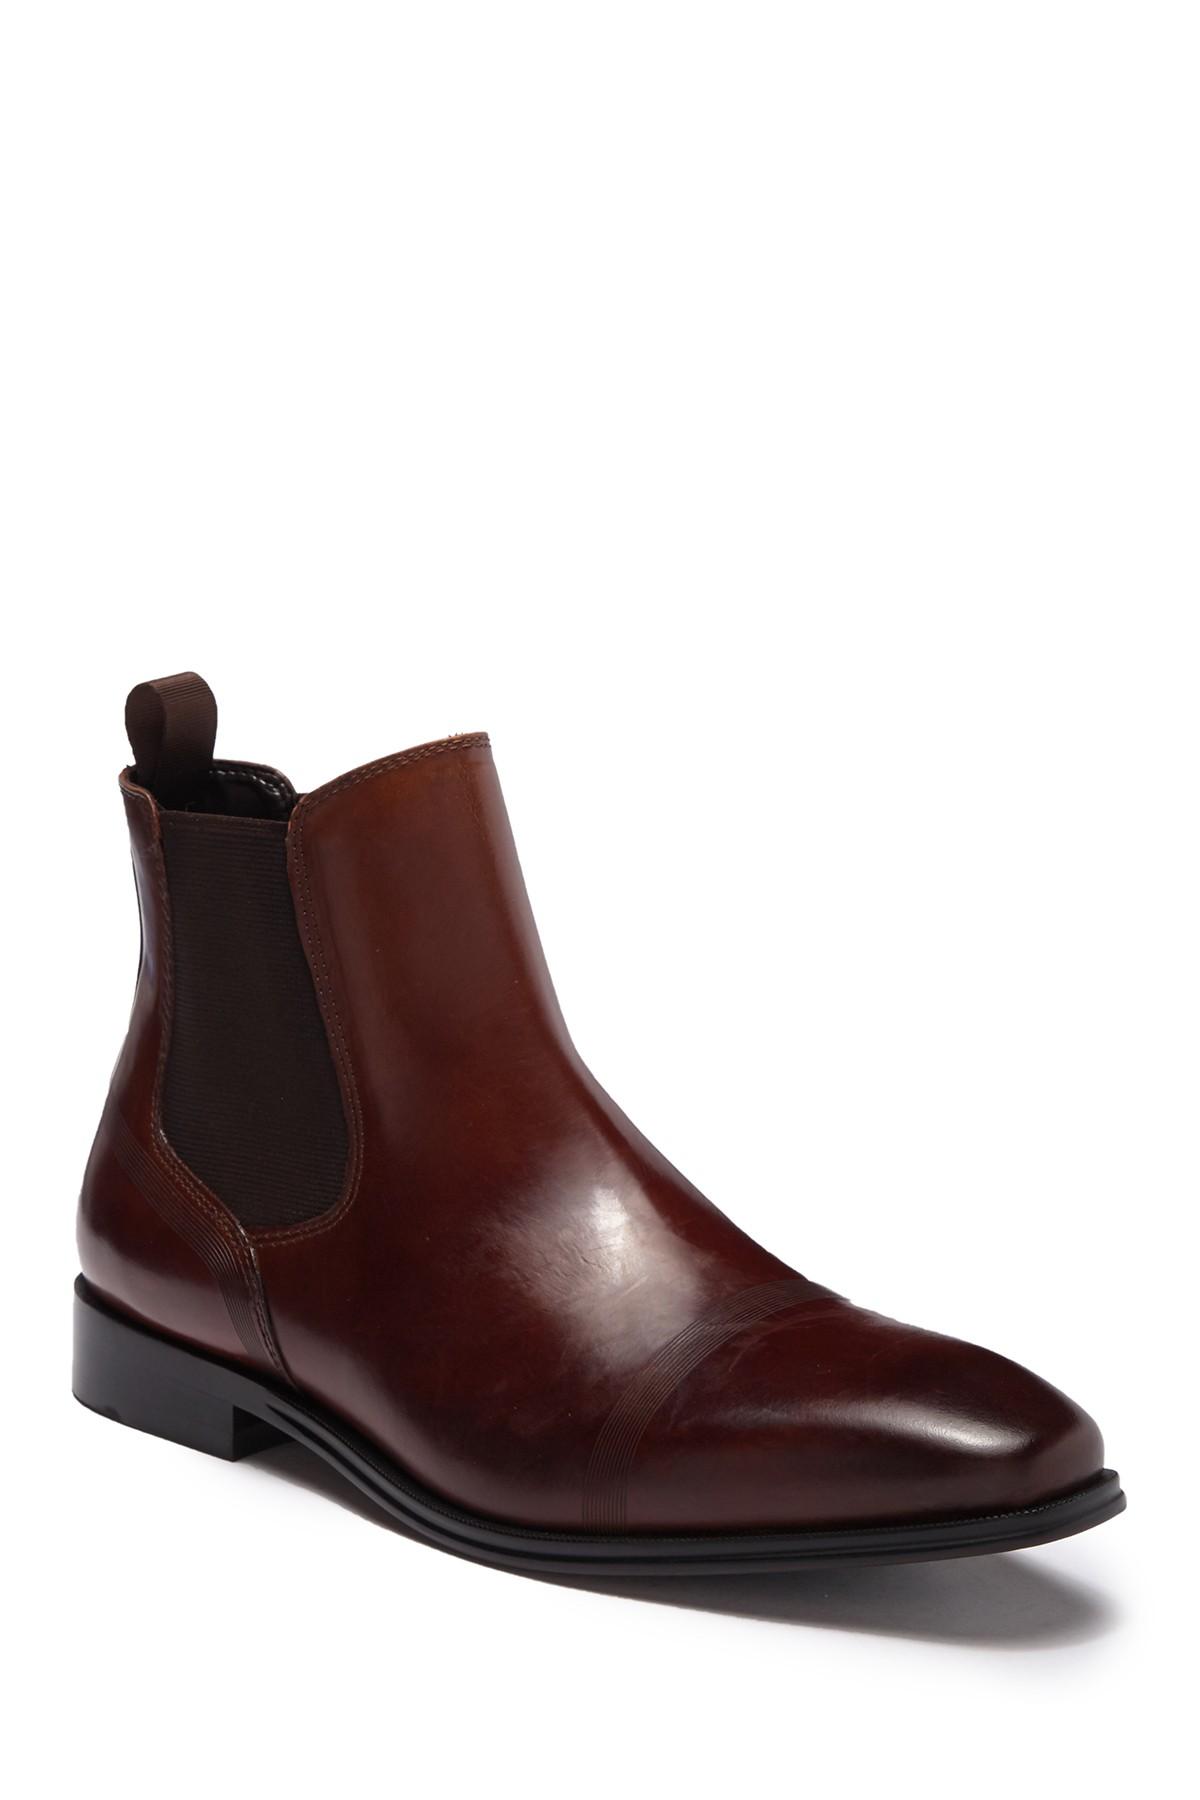 Kenneth Cole Reaction Leather Pure Chelsea Boot in Brown for Men - Lyst